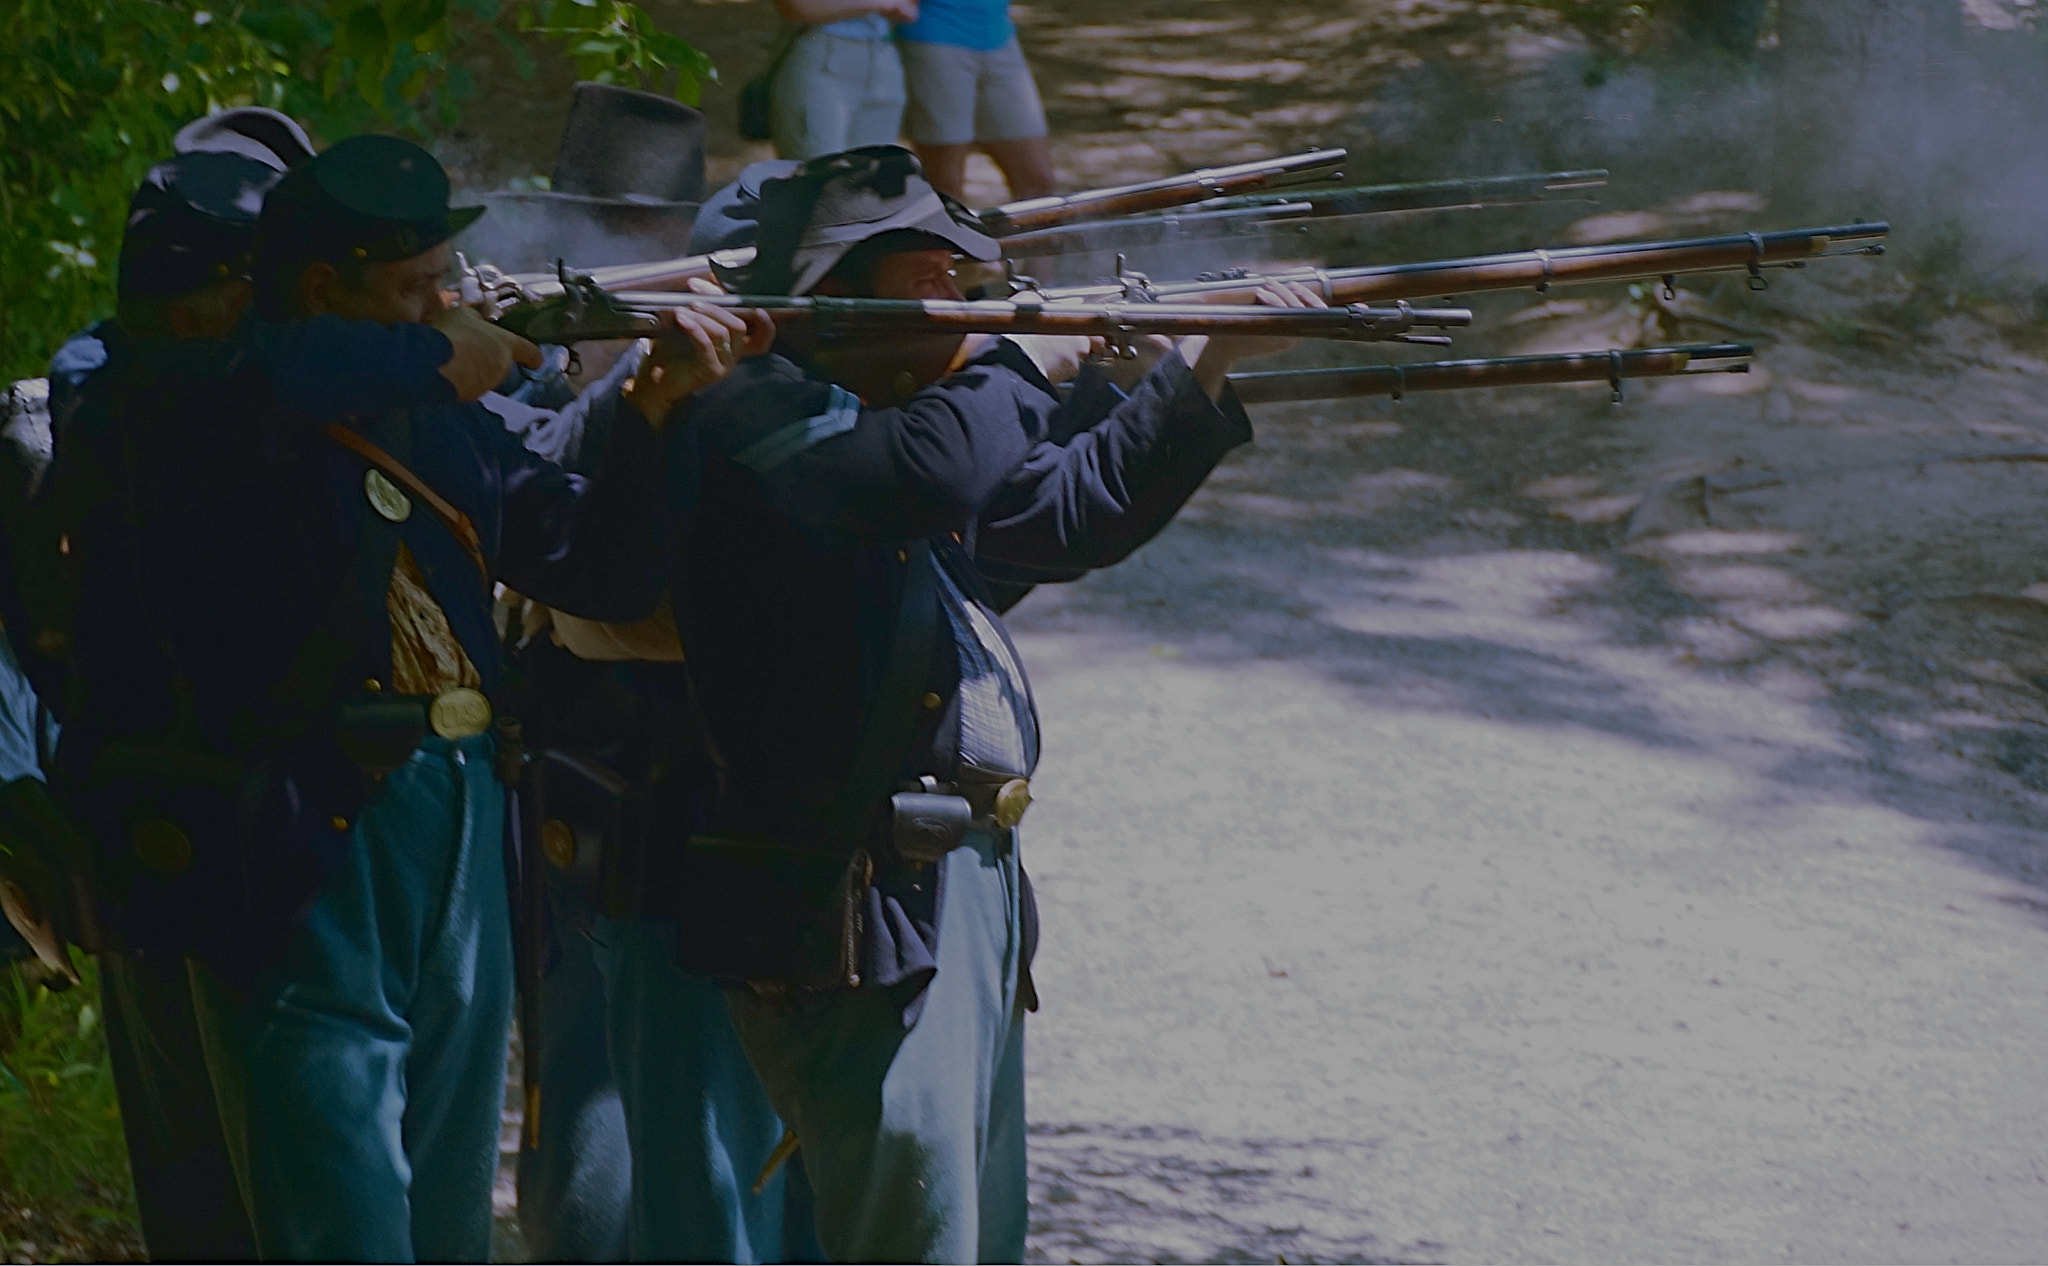 Sony a99 II + Sony DT 18-250mm F3.5-6.3 sample photo. Civil war reenactment at sweetwater park georgia photography